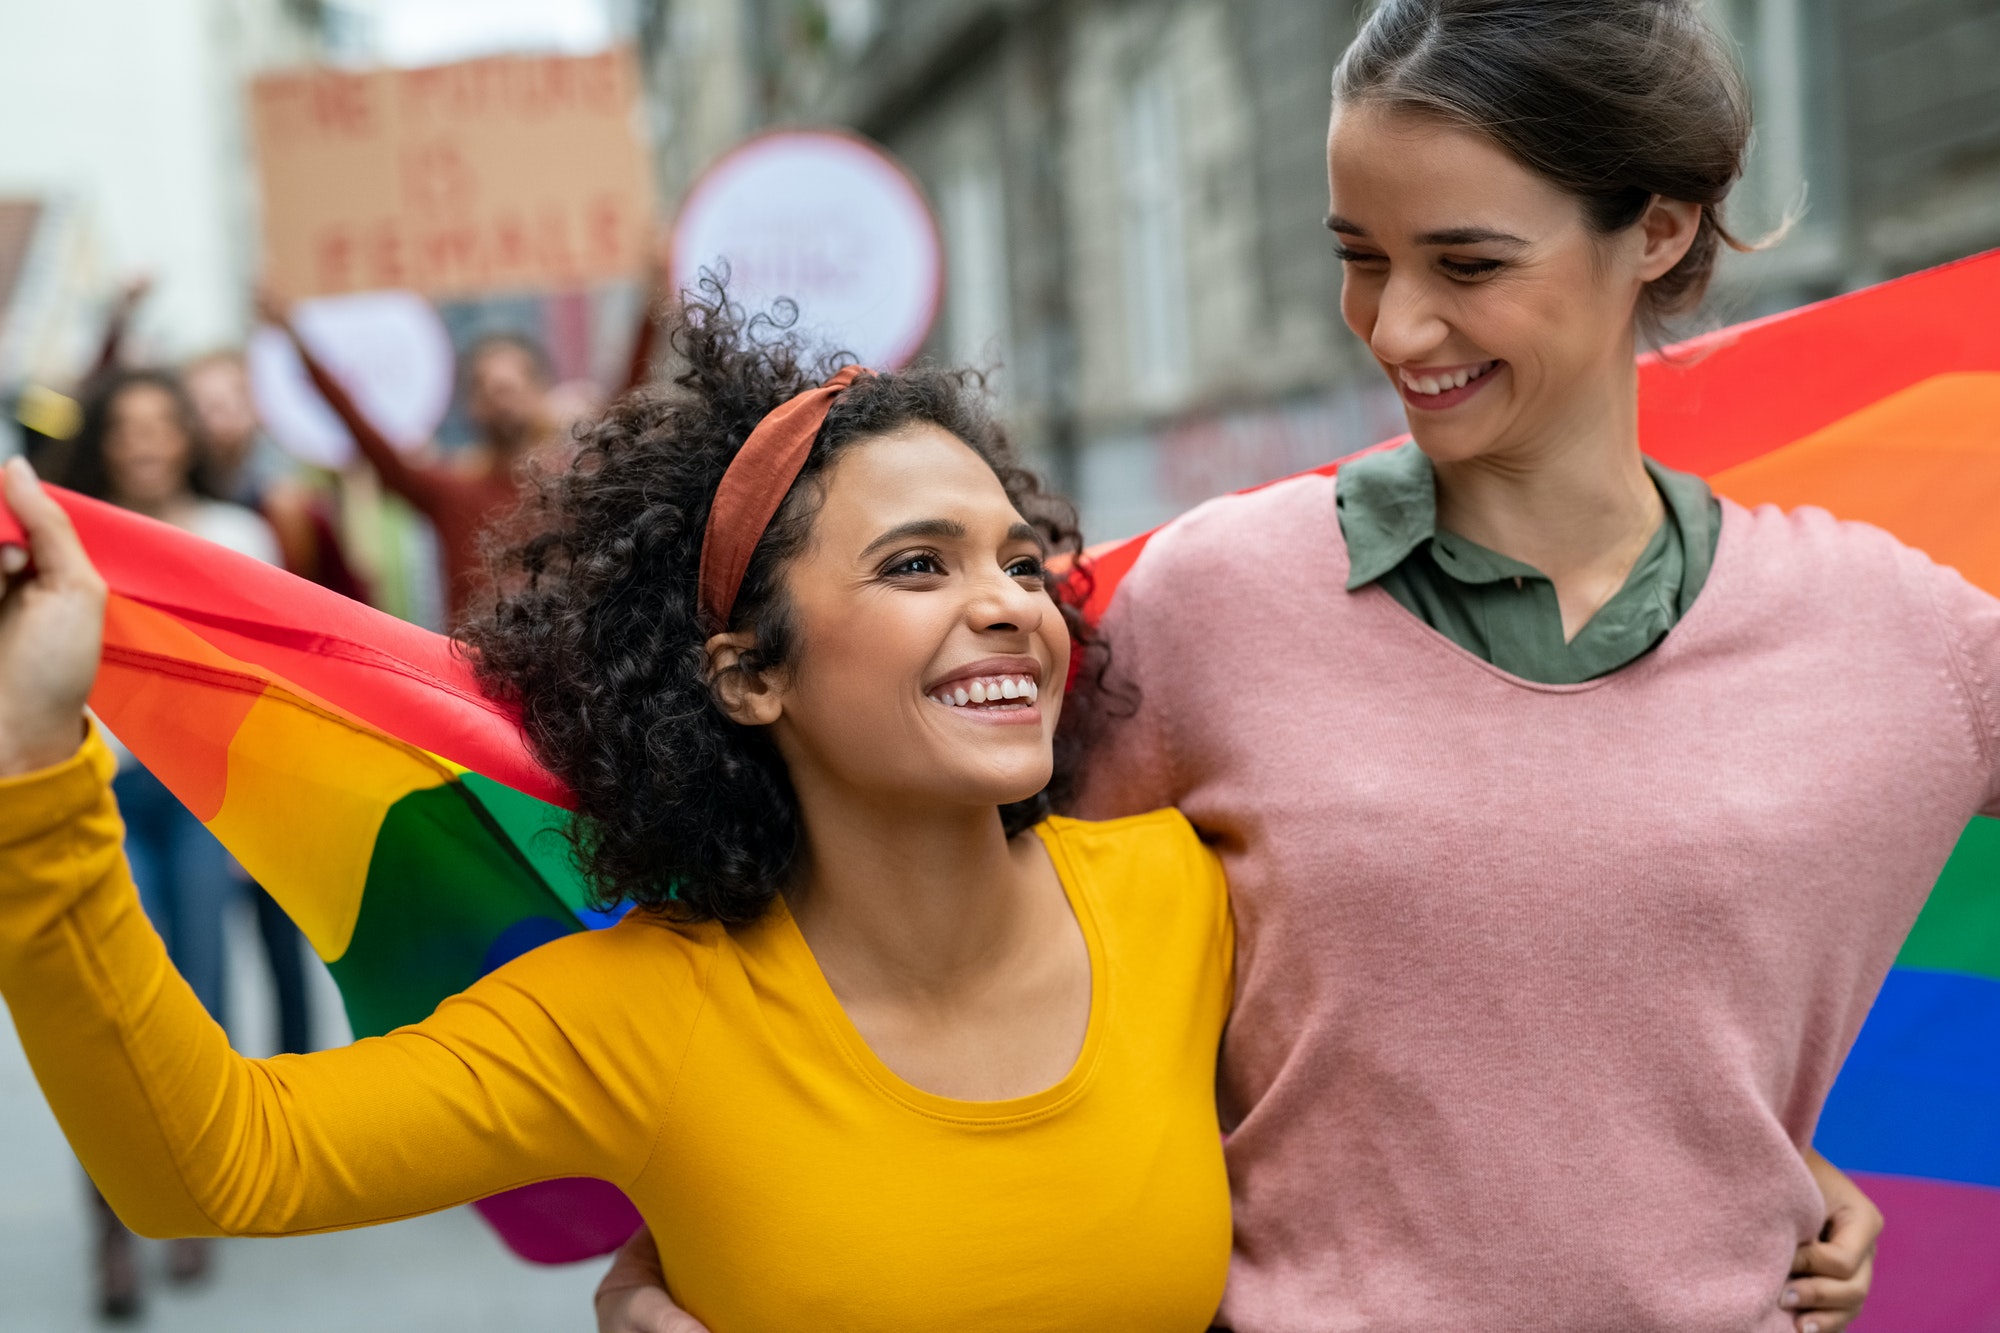 Lesbian couple at gay pride with rainbow flag